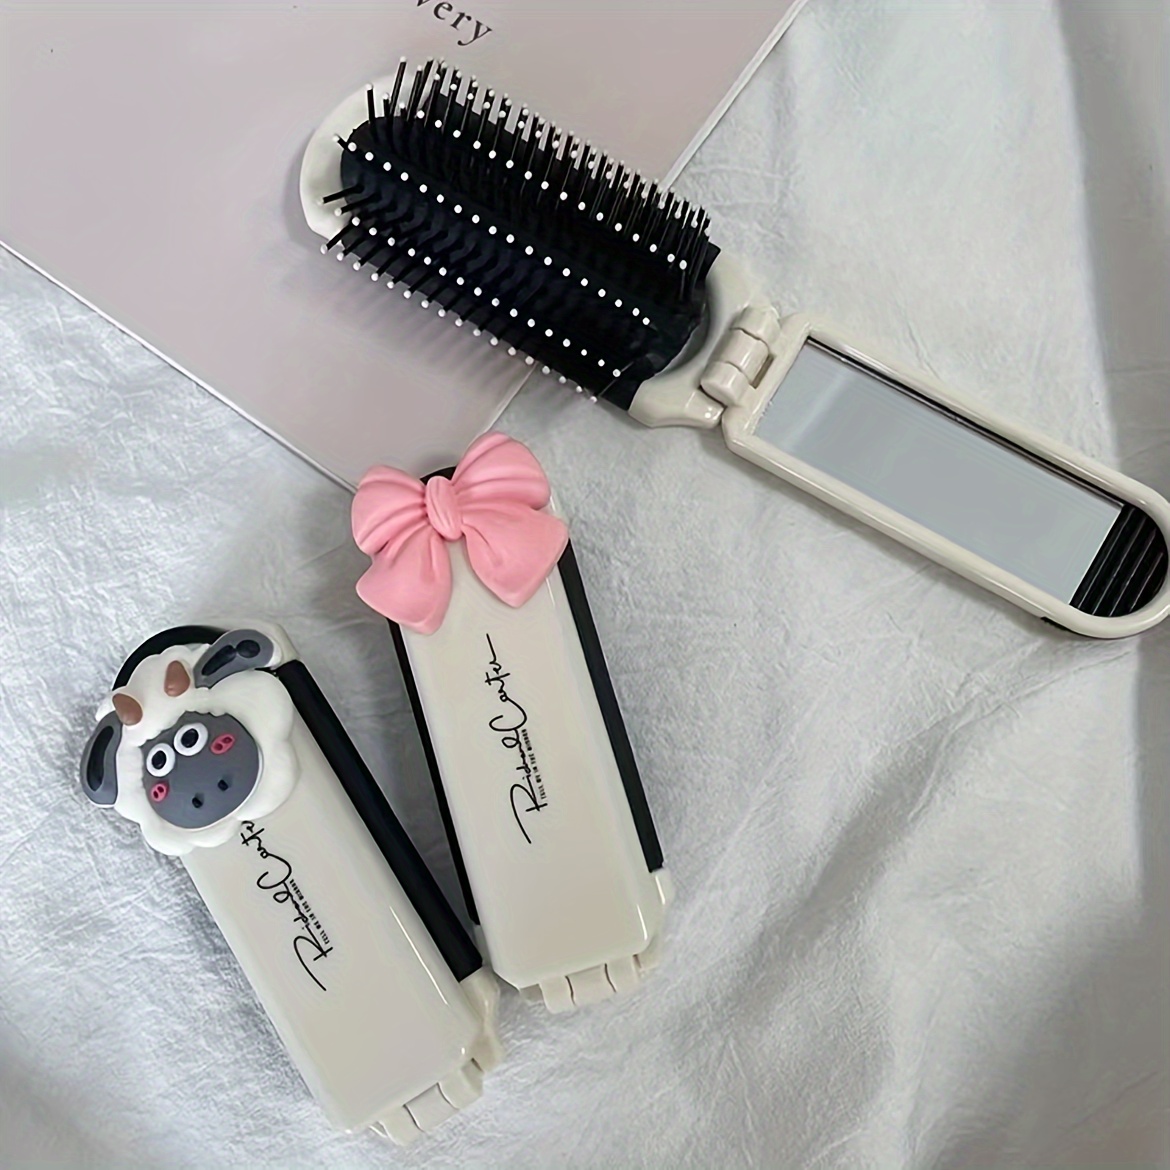 

1pc Folding Hair Comb, Airbag Hair Brush With Mirror, Scalp Massage Brush, Lovely Bowknot Decoration Comb, Cute Cartoon Sheep Decorative Comb Portable Hair Styling Tool